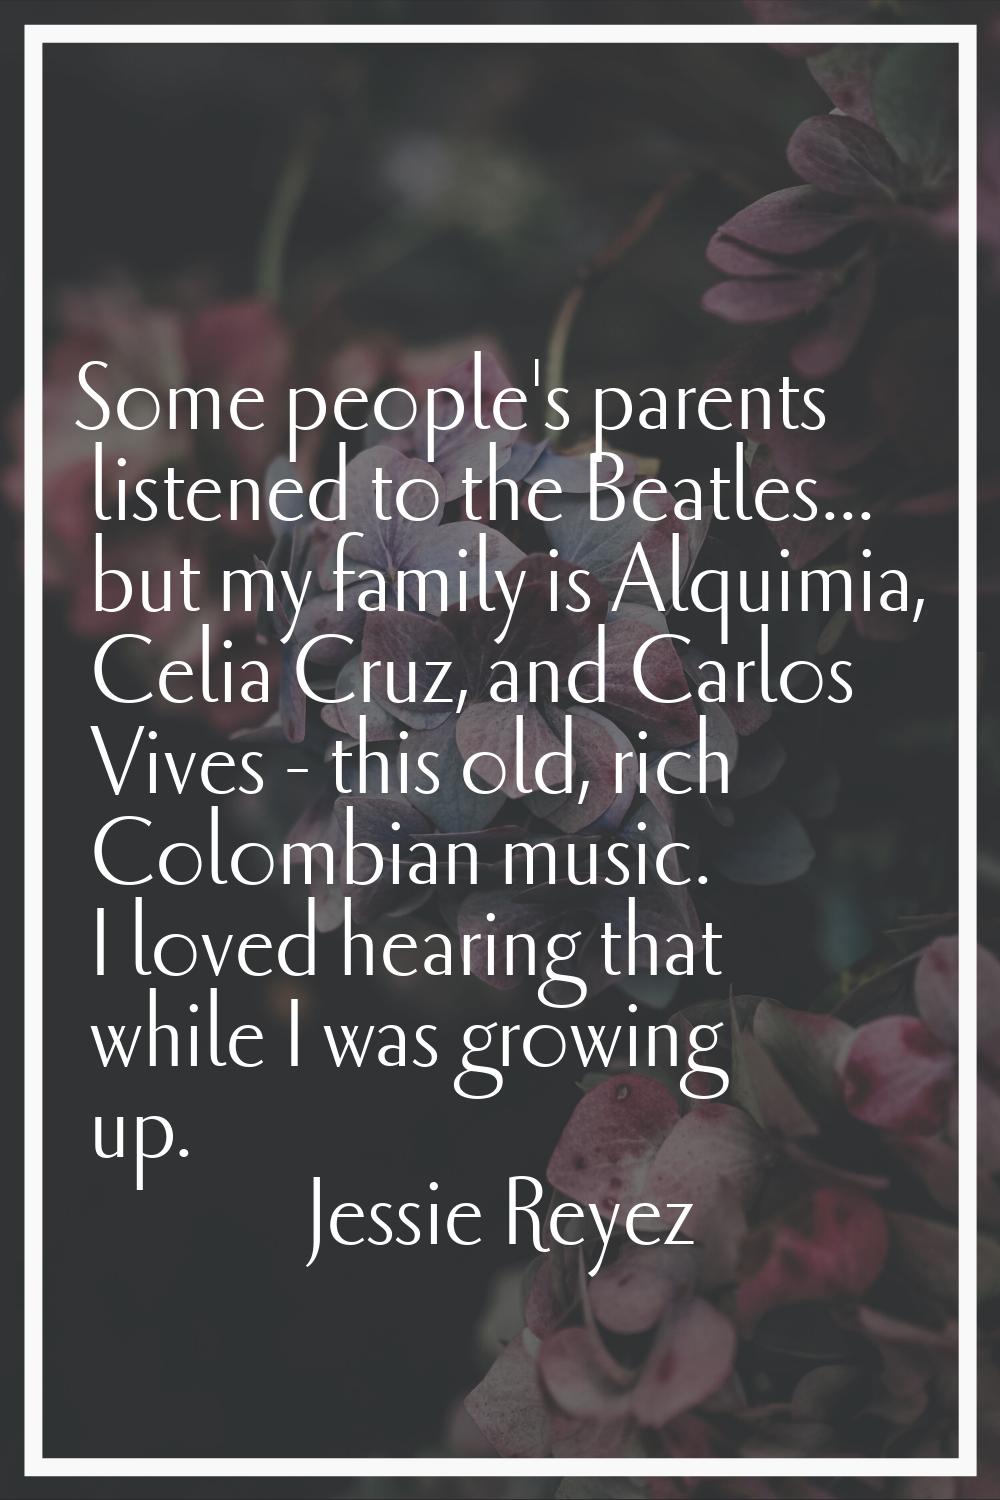 Some people's parents listened to the Beatles... but my family is Alquimia, Celia Cruz, and Carlos 